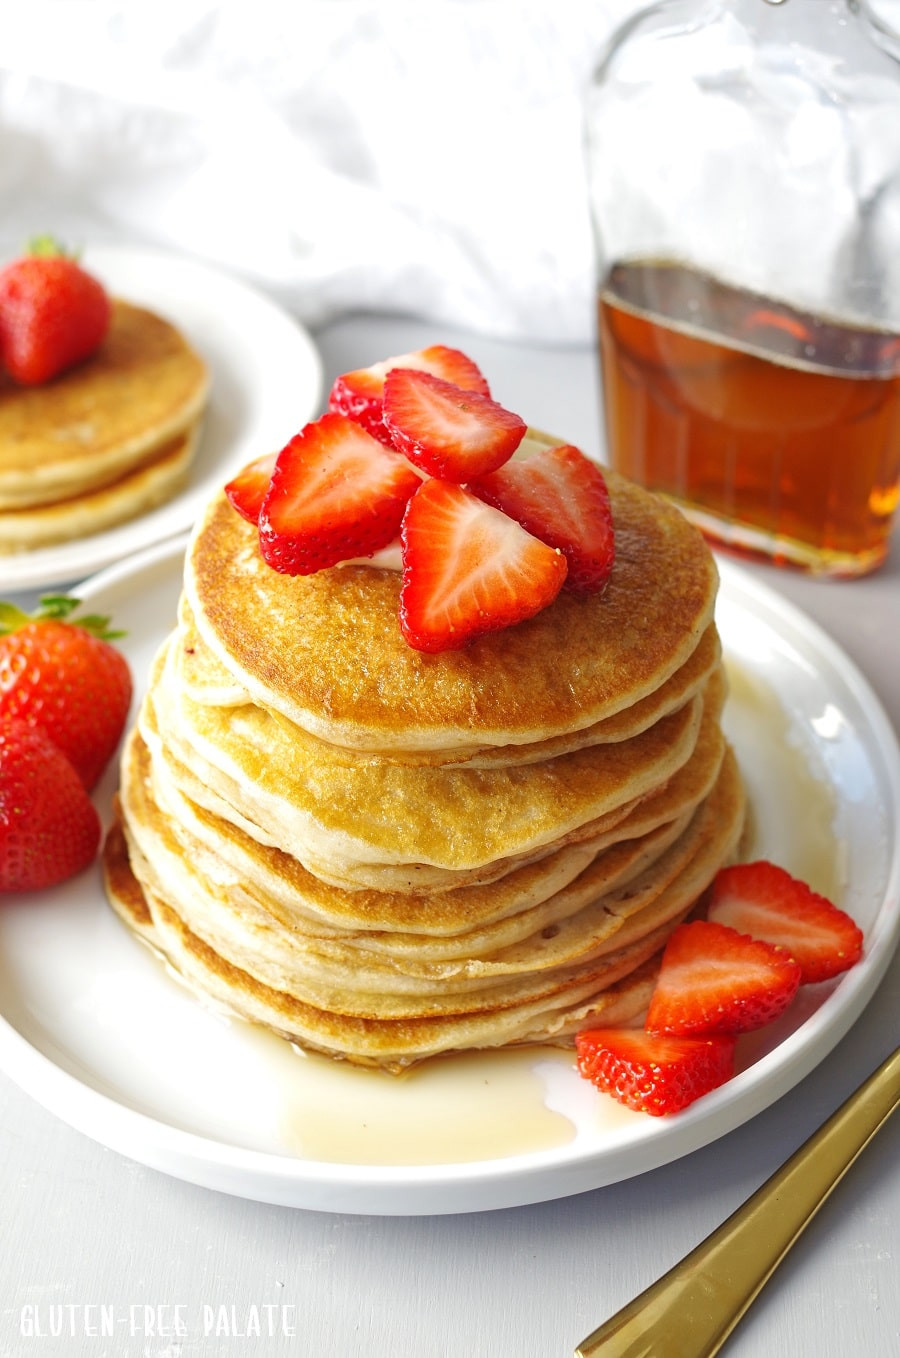 Gluten And Dairy Free Pancakes
 Fluffy Gluten Free Pancakes – Mix now or save for later